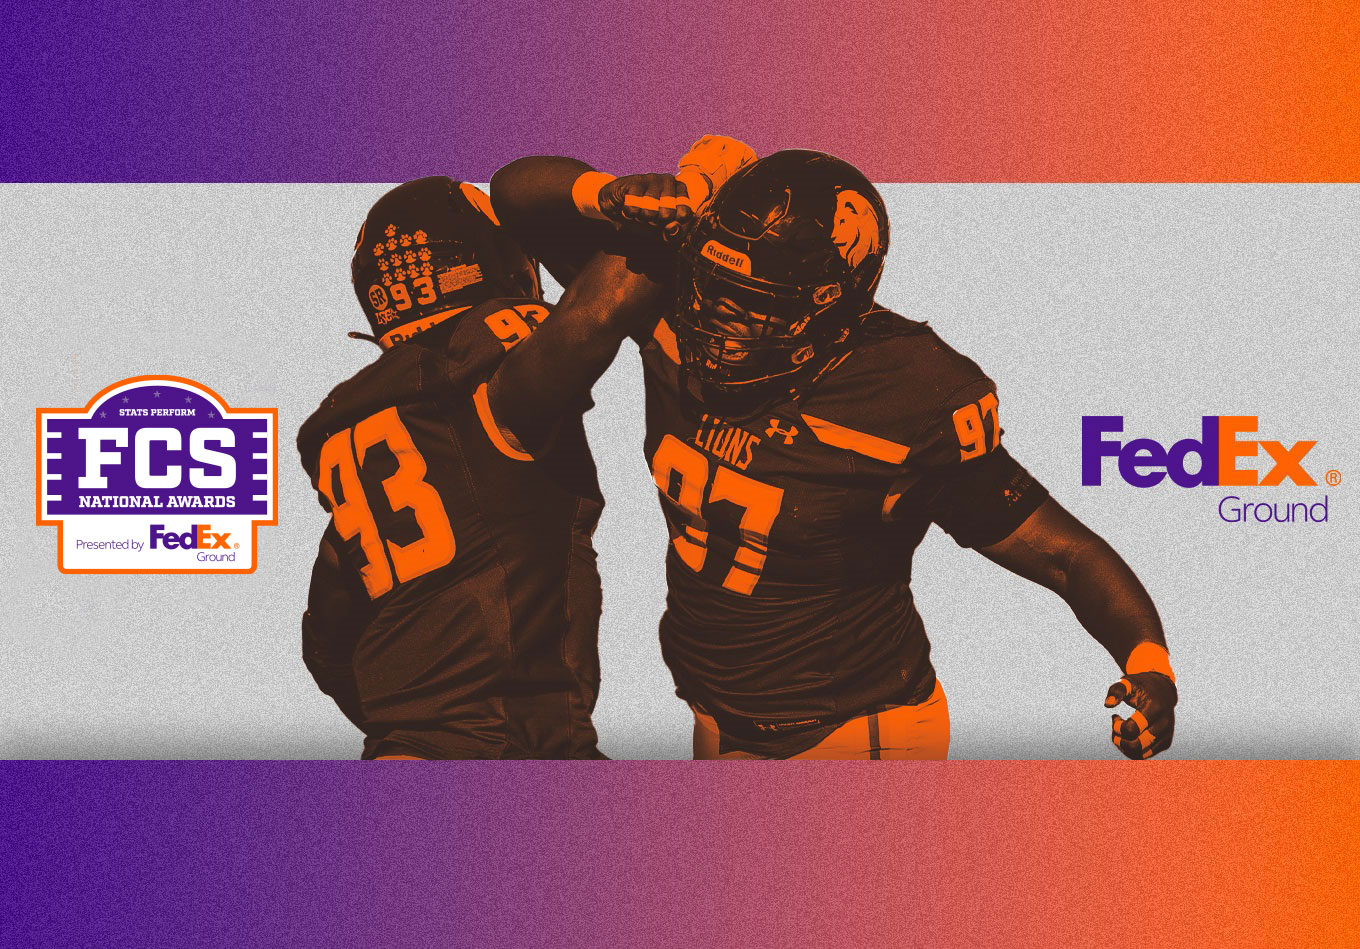 FedEx Ground FCS National Awards on Campus: A Season to Remember